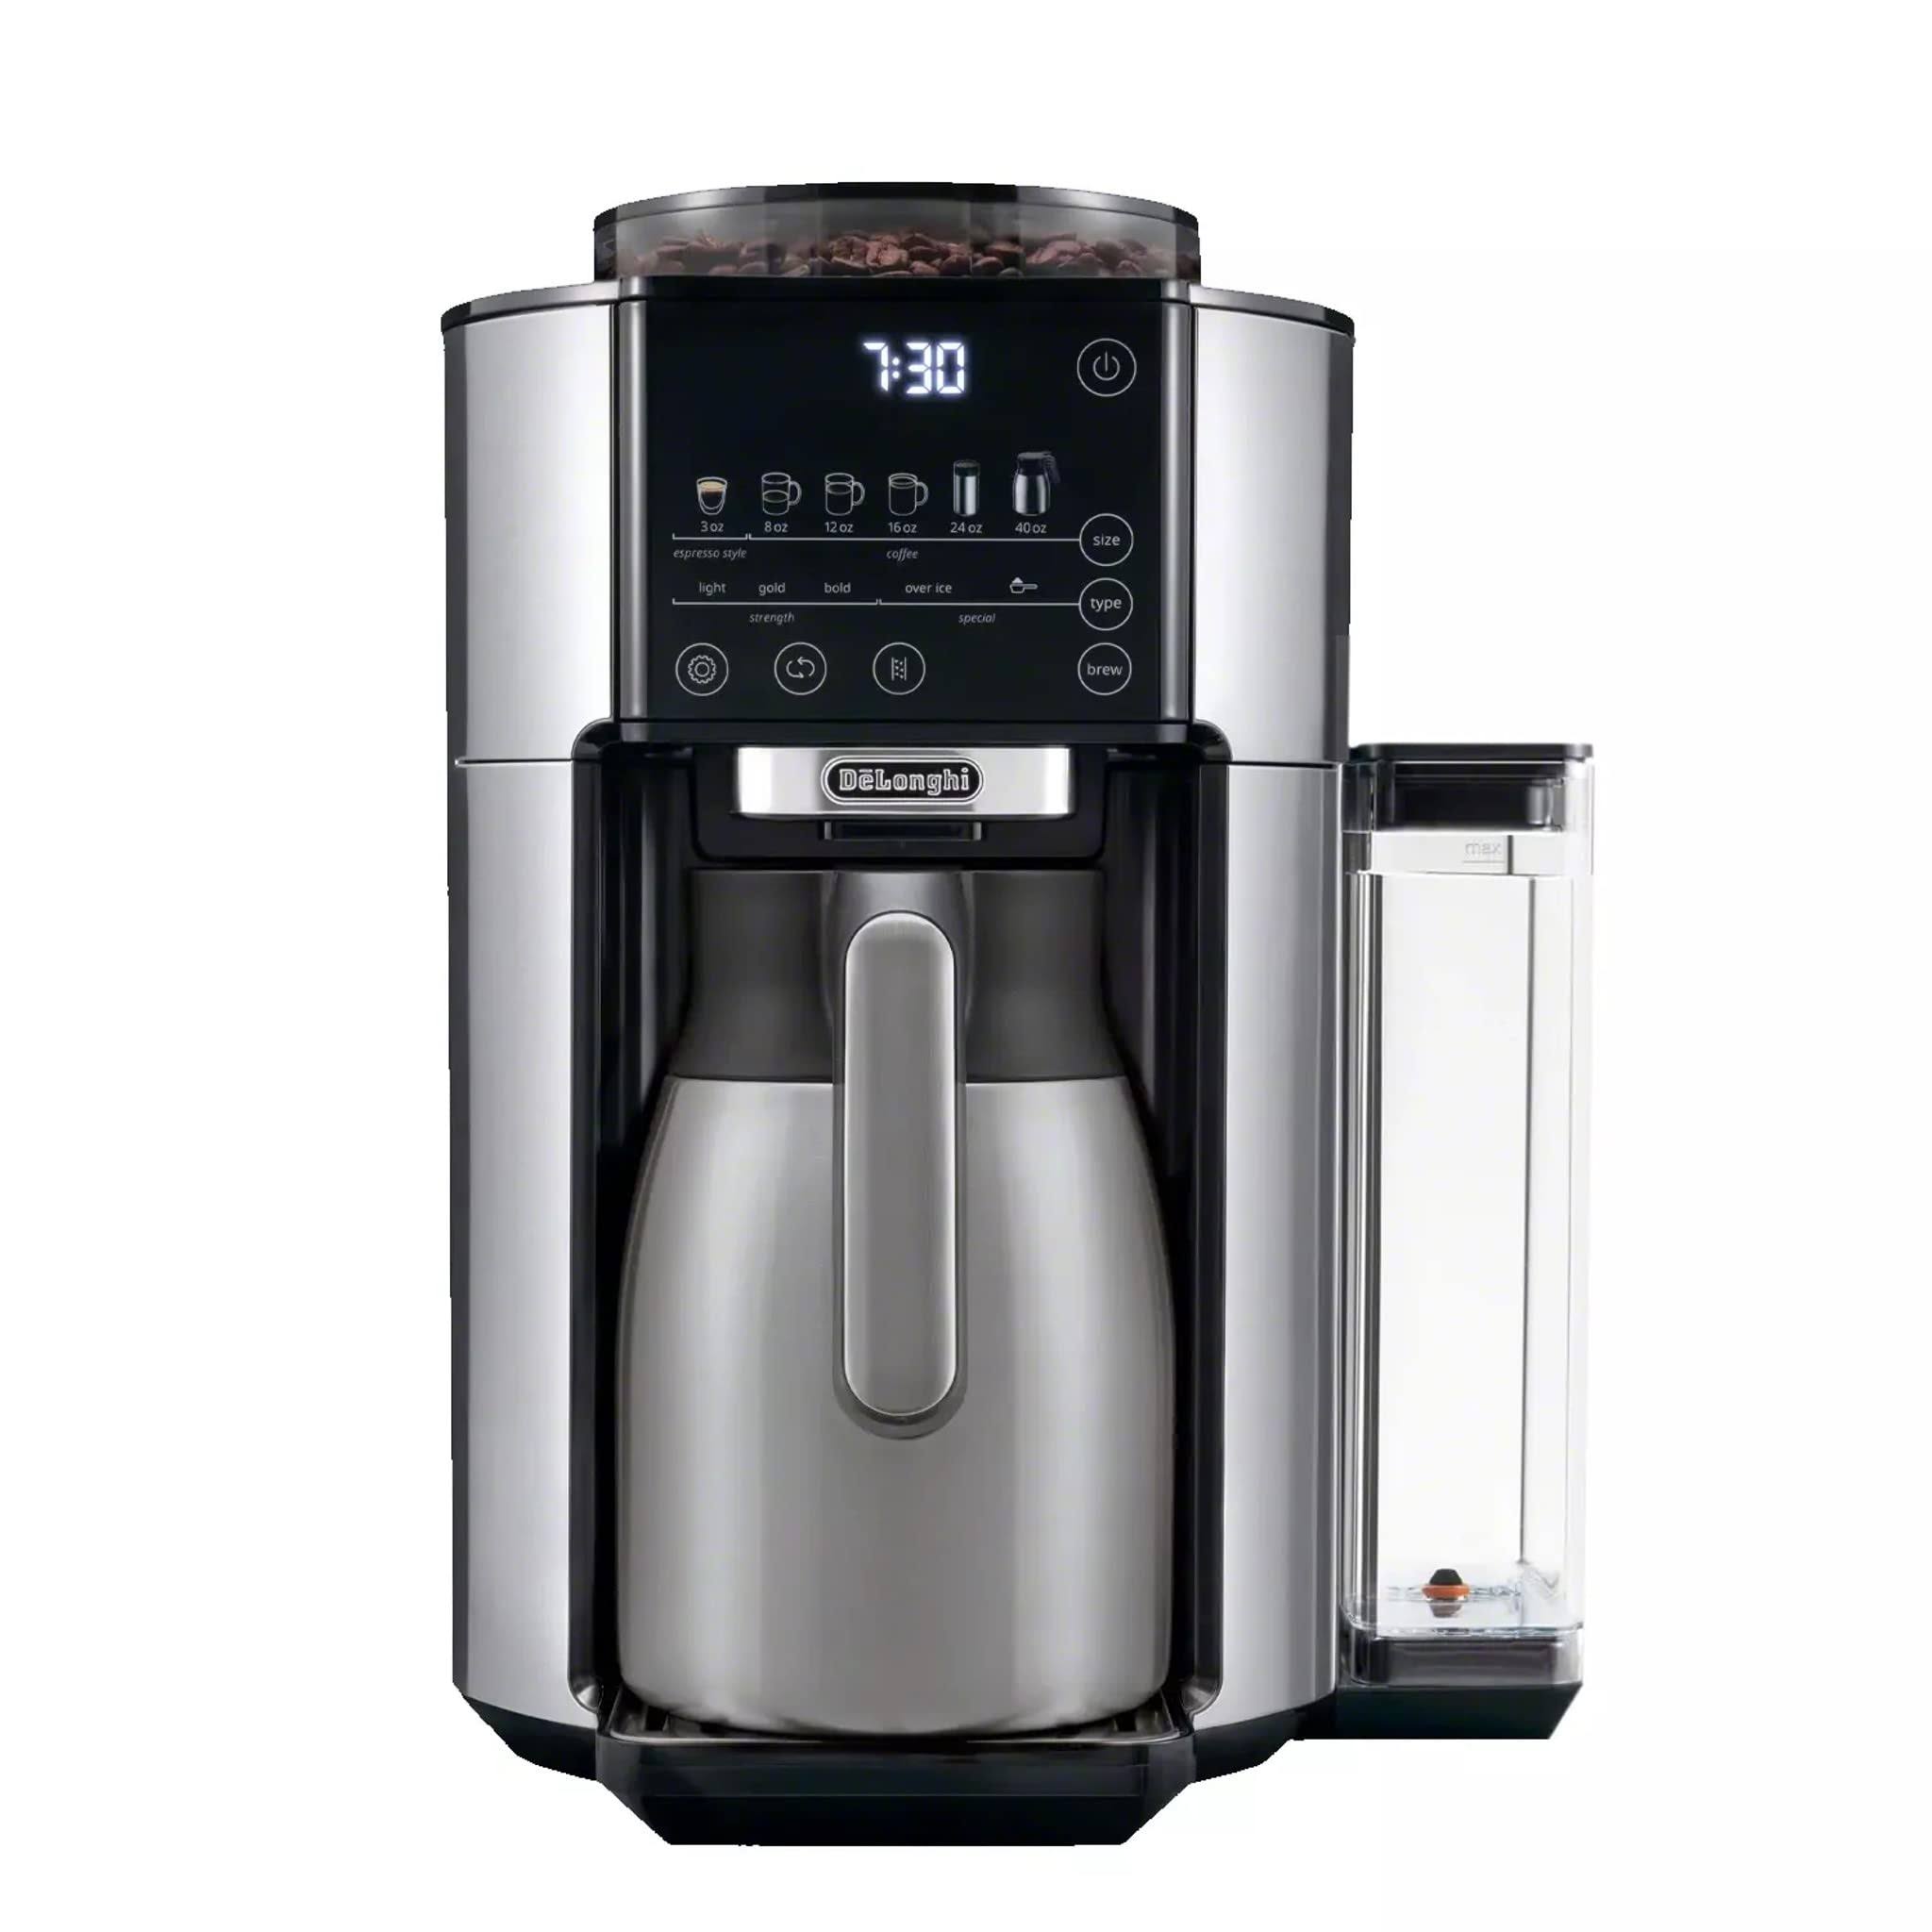 Breville BDC400 Precision Brewer Glass Coffee Maker - Brushed Stainless Steel